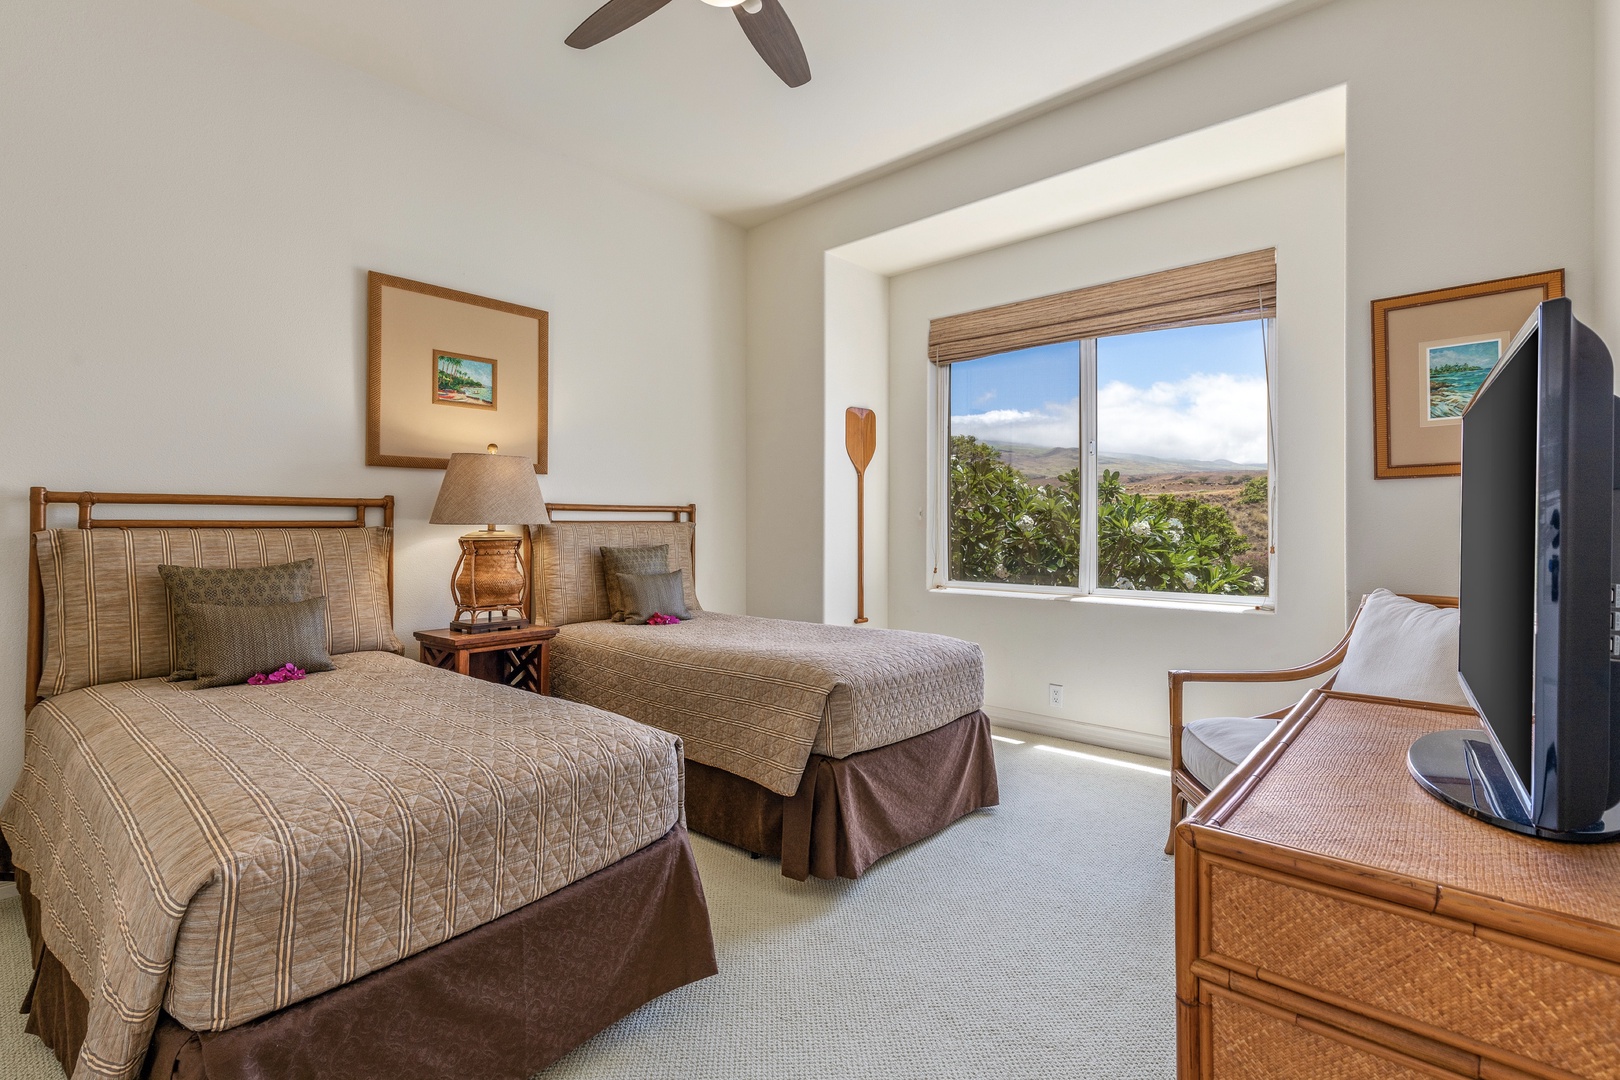 Kamuela Vacation Rentals, 2BD Kumulani (I-4) at Mauna Kea Resort - Guest room with two twin beds (can convert to a king upon request) and
mountain views.